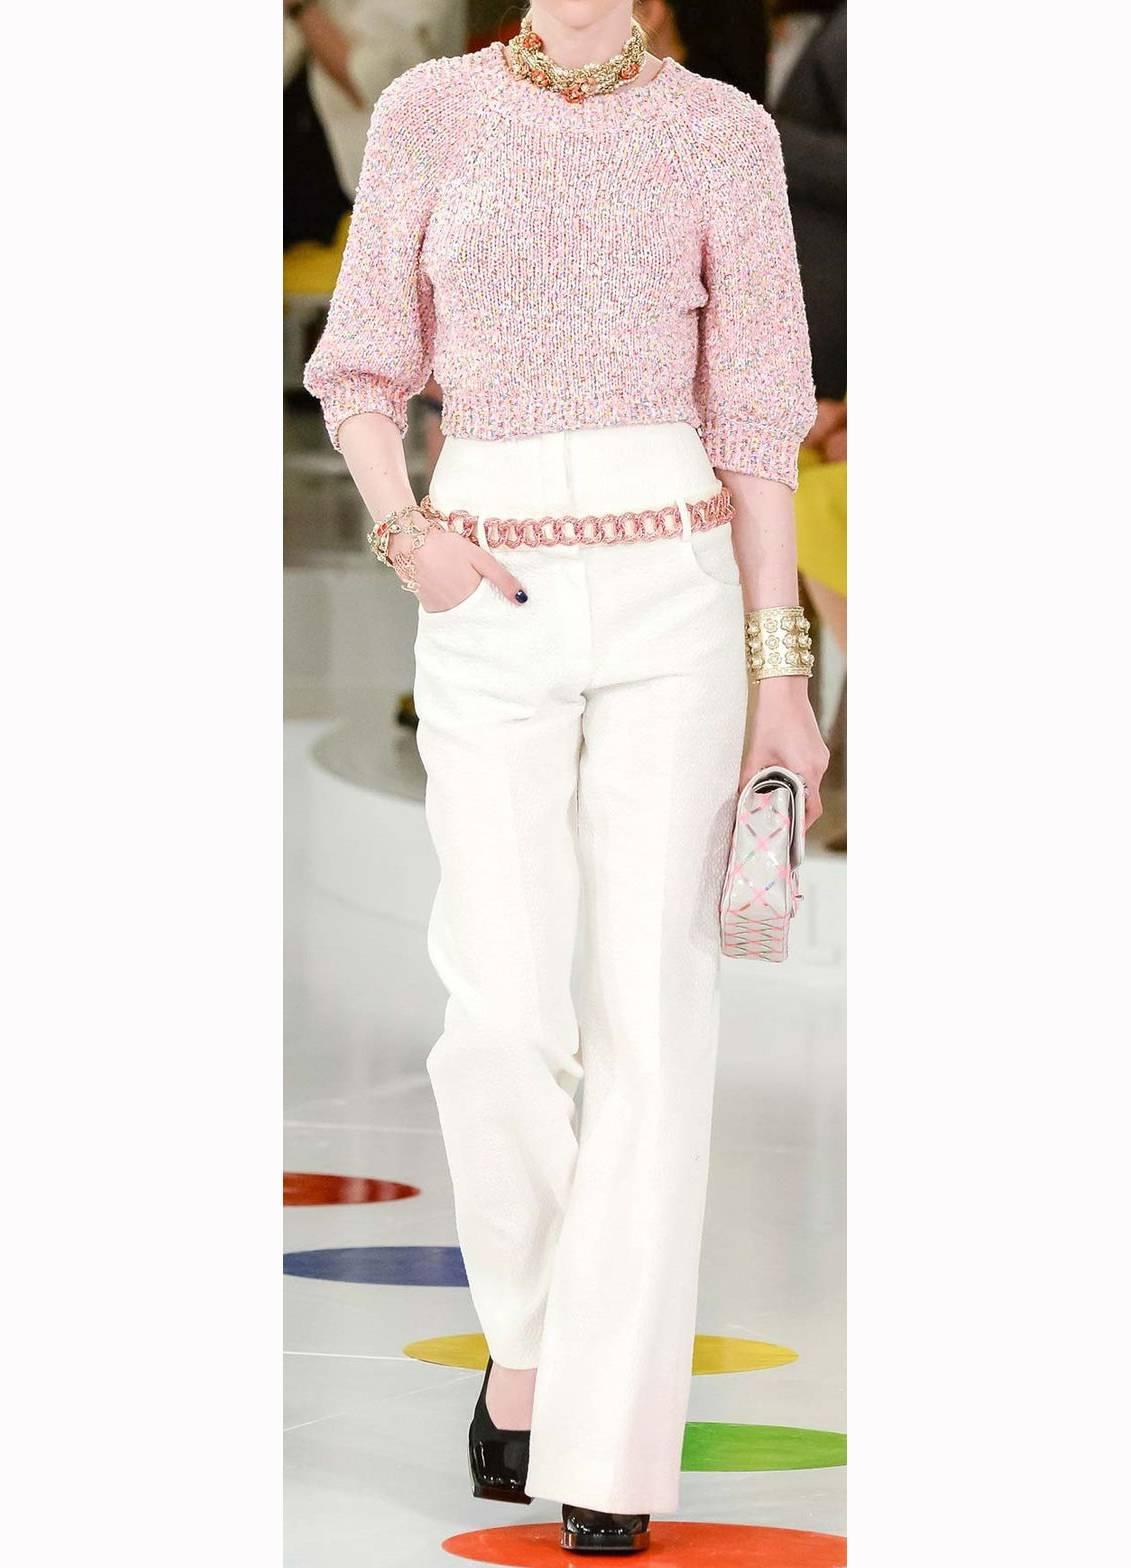 Women's Chanel Pink Crewneck Sweater – 2016 Paris Seoul Cruise Collection – Like New